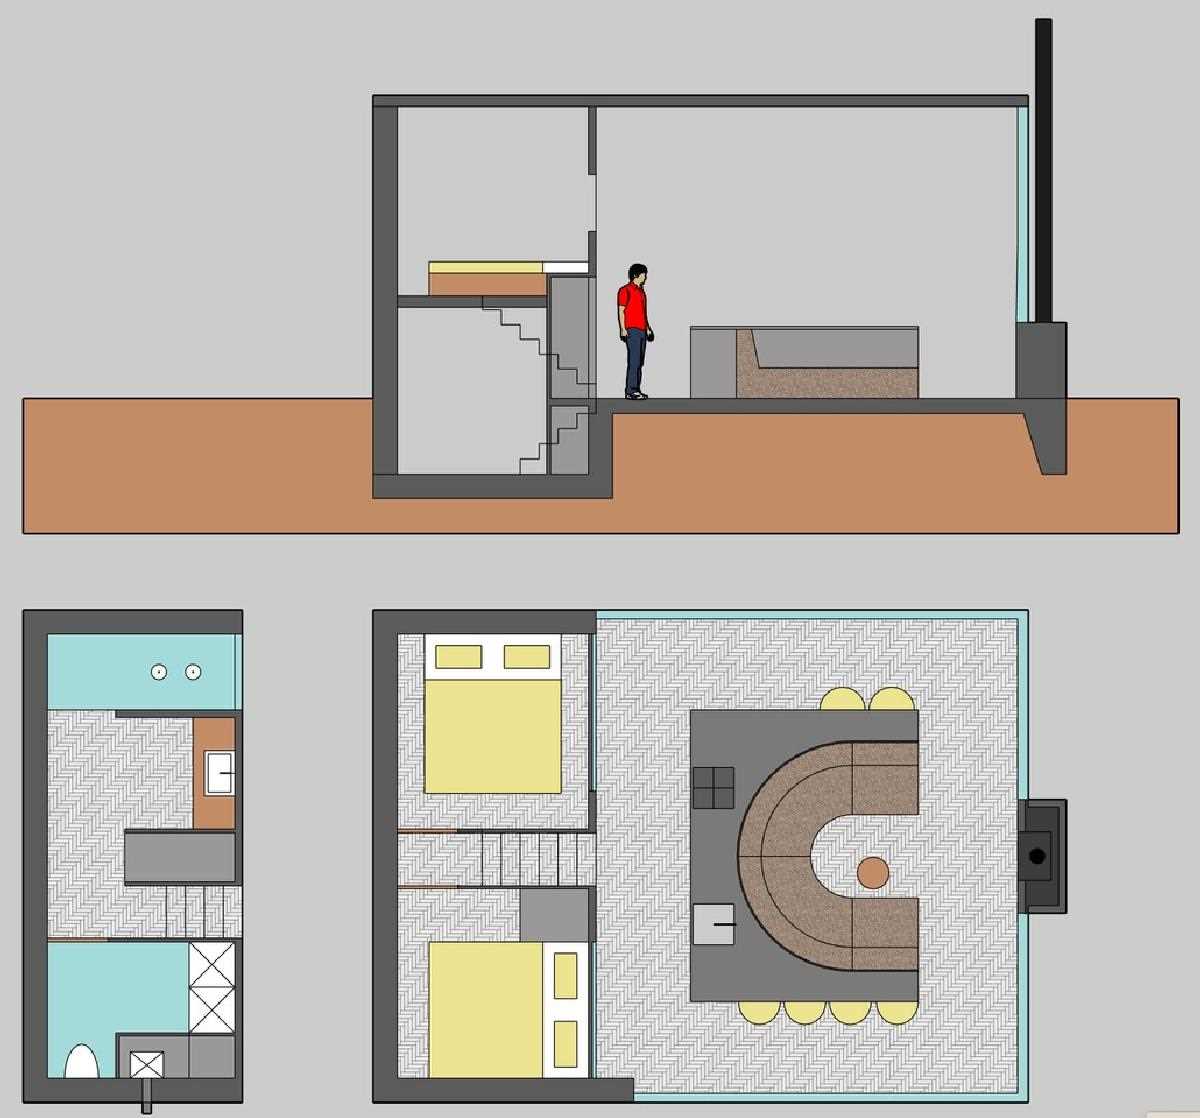 The floor plan of a small home with two bedrooms and a half sunken bathroom.